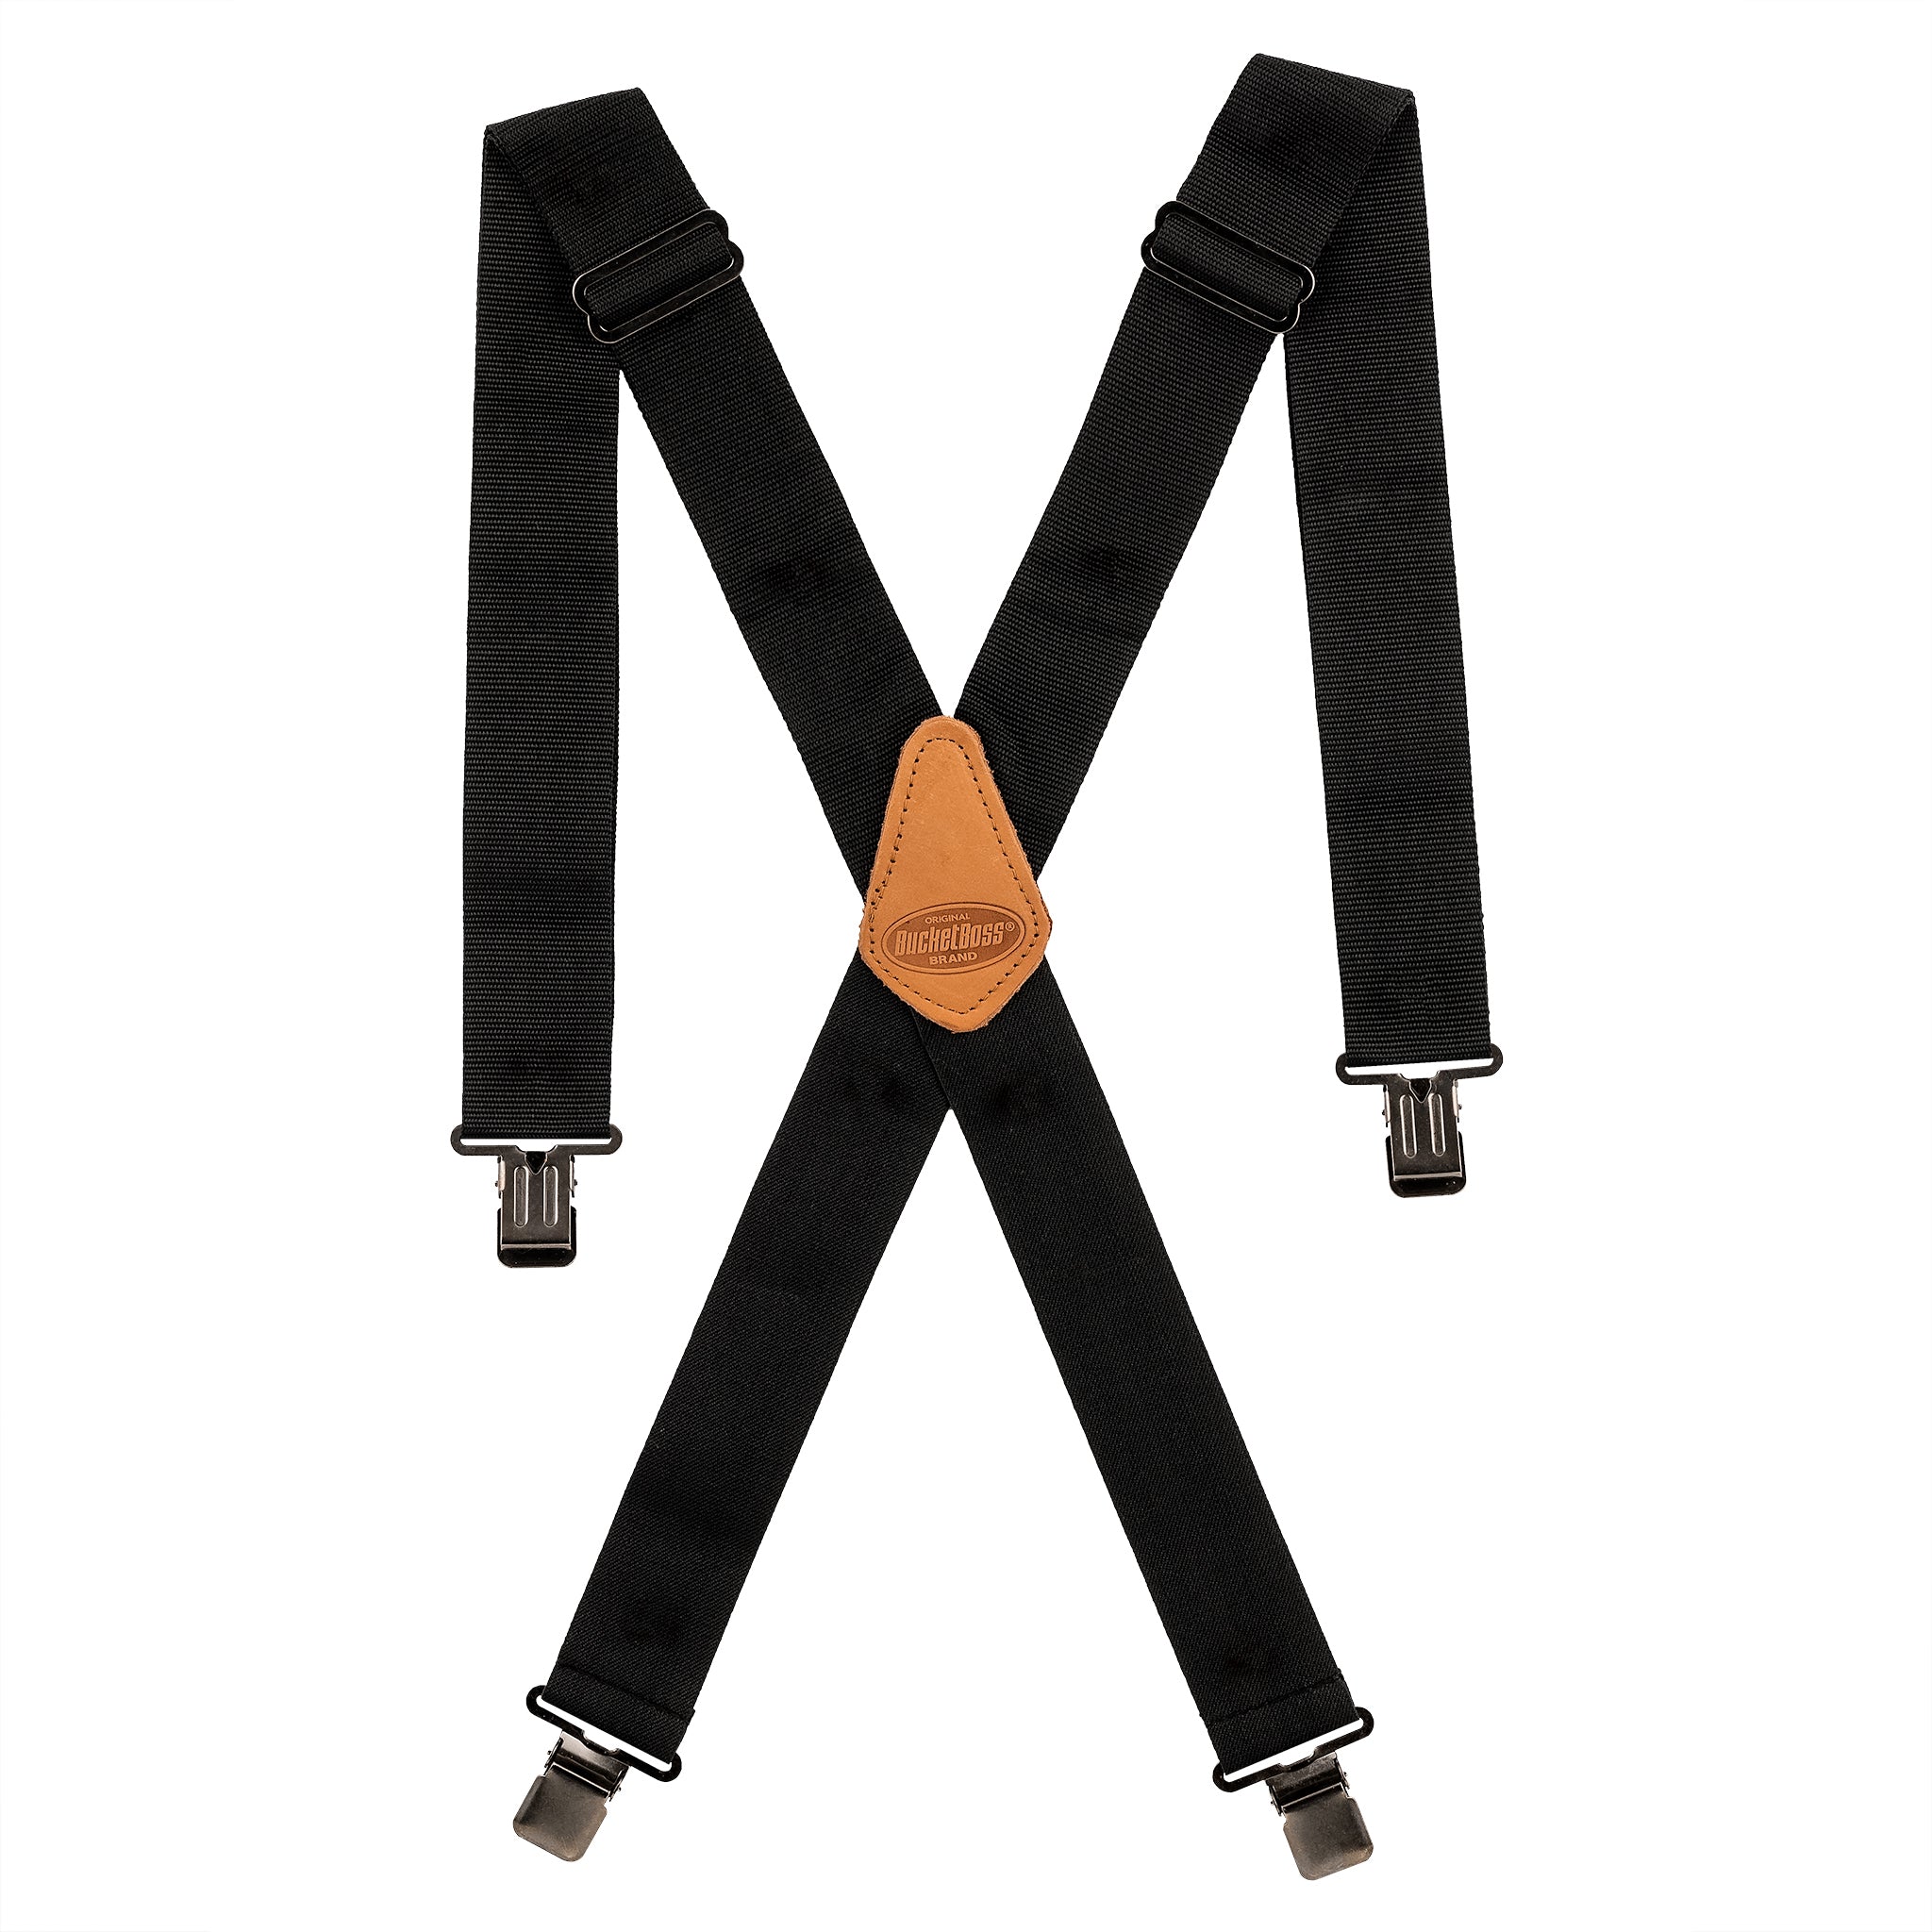 Dropshipping Elastic nylon 35mm wide durable and adjustable trouser braces  suspender - Black - Go Dropship